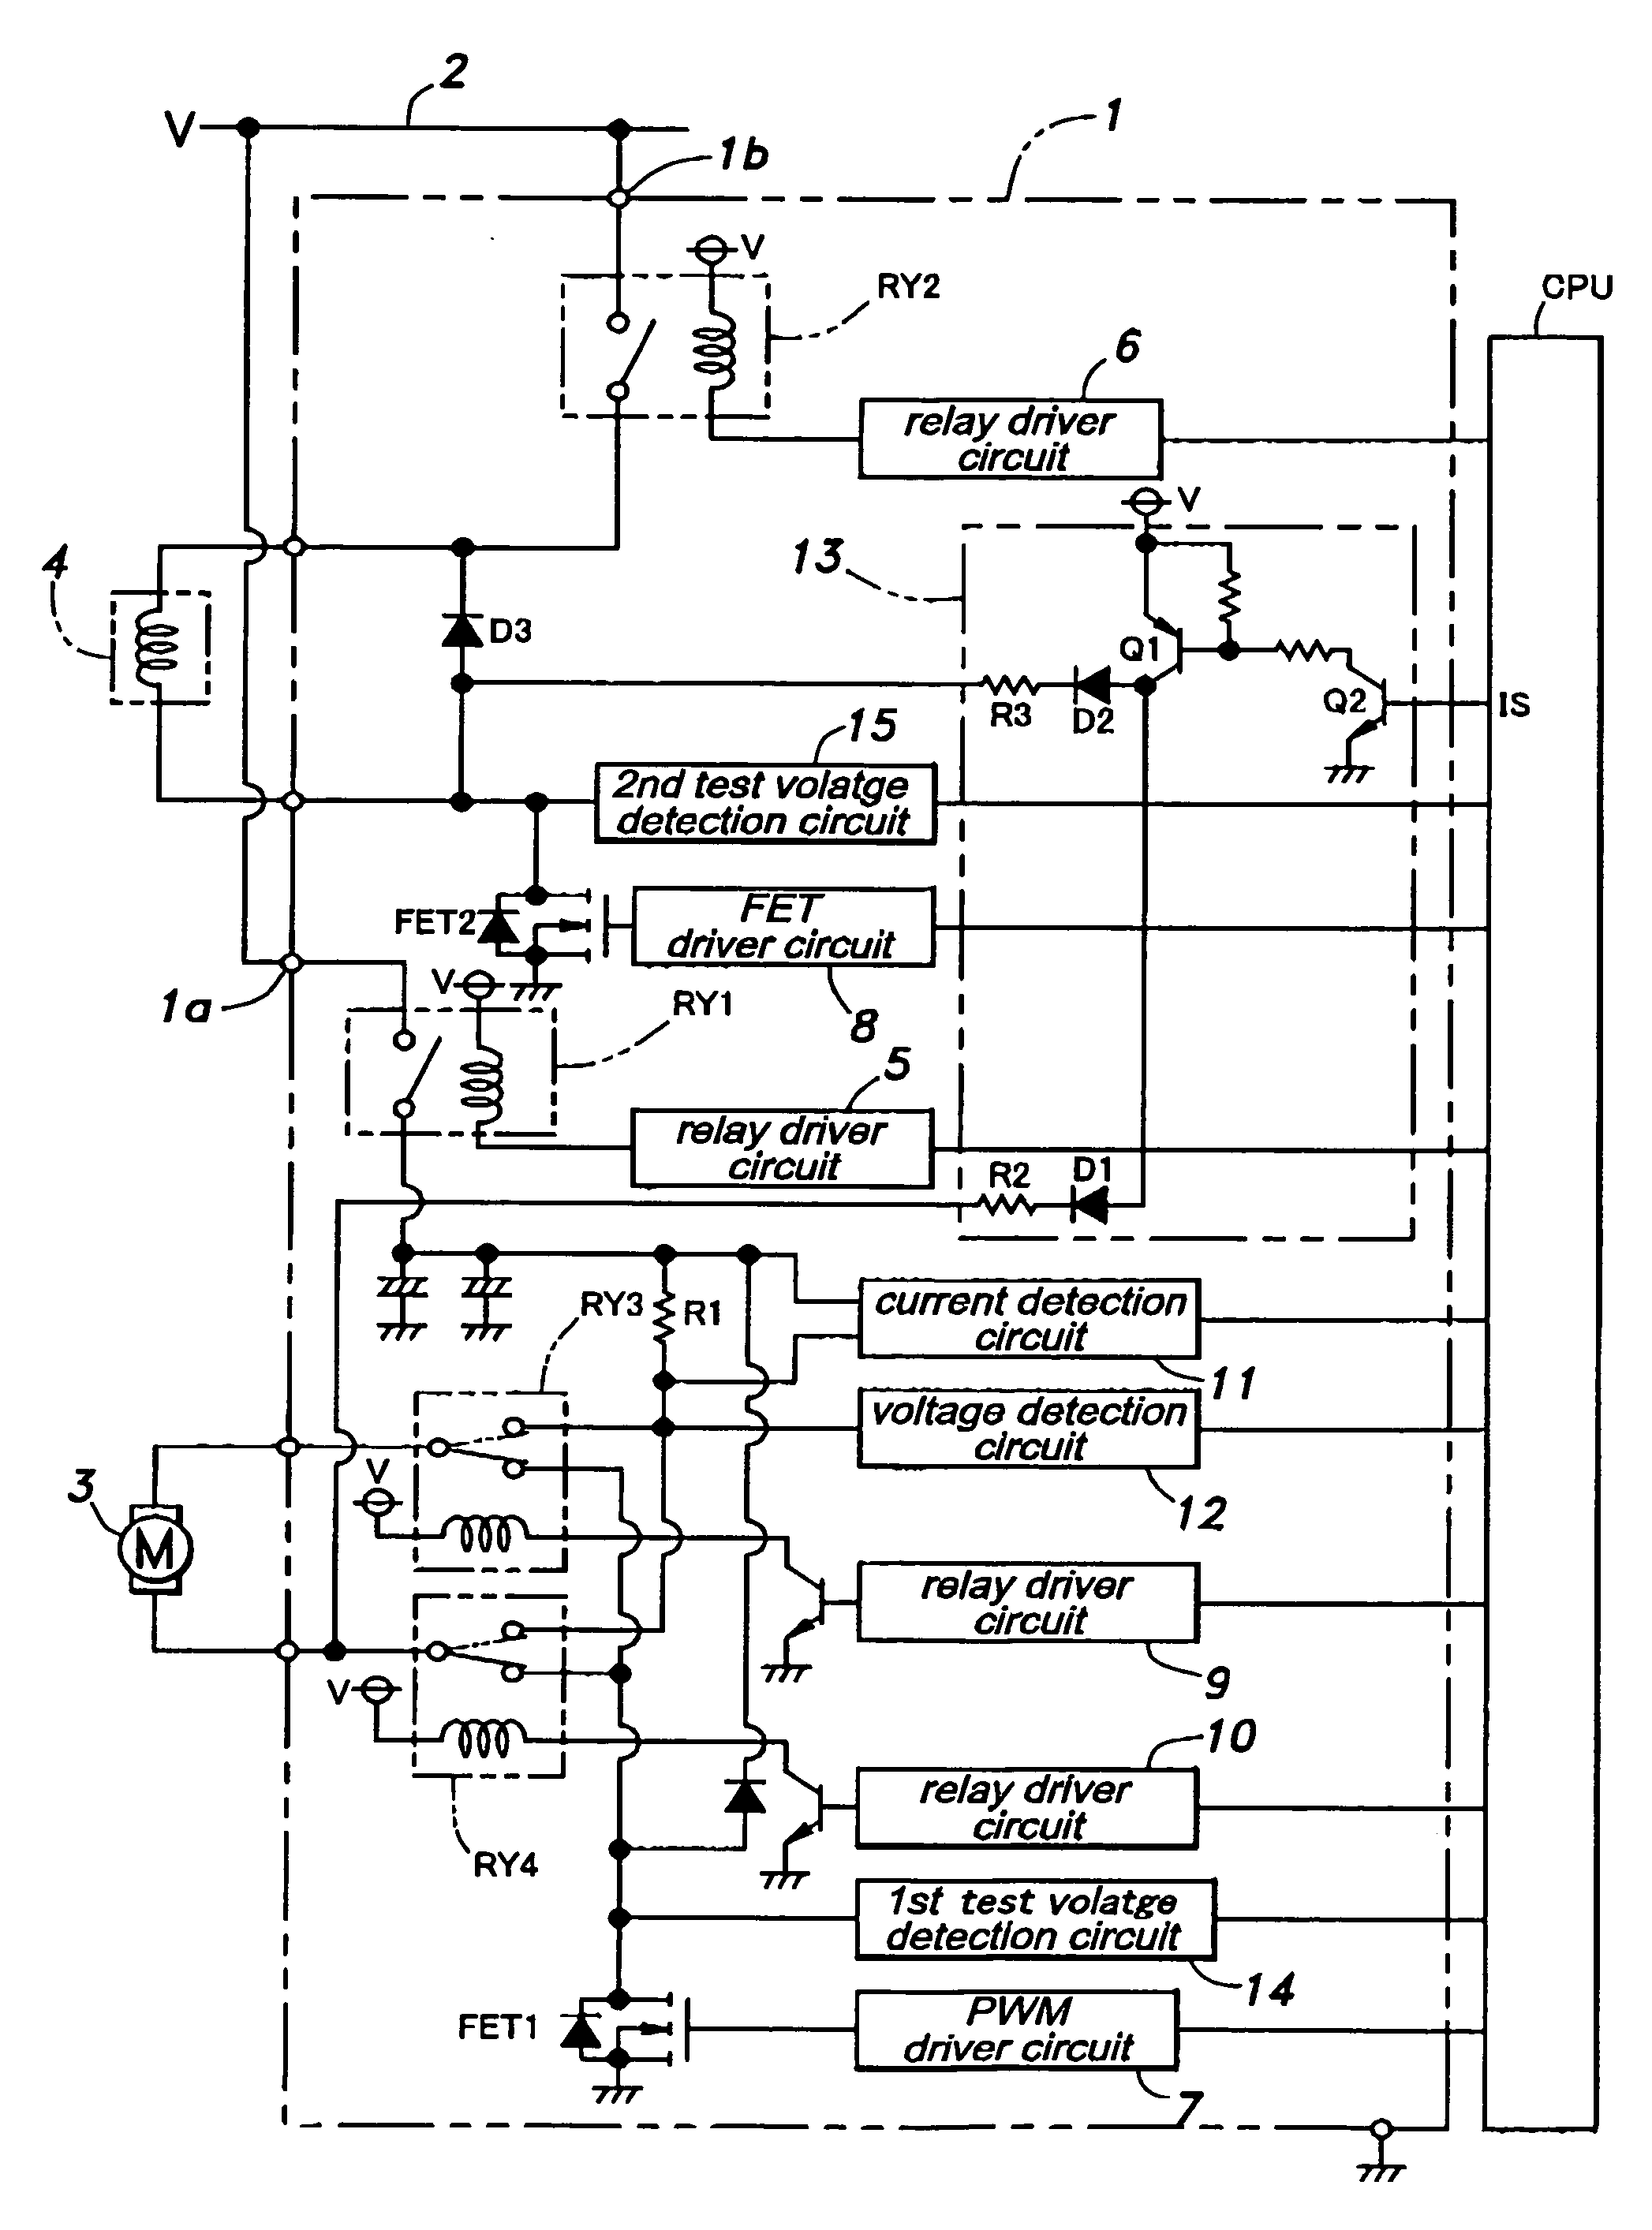 Fault detection circuit for a driver circuit